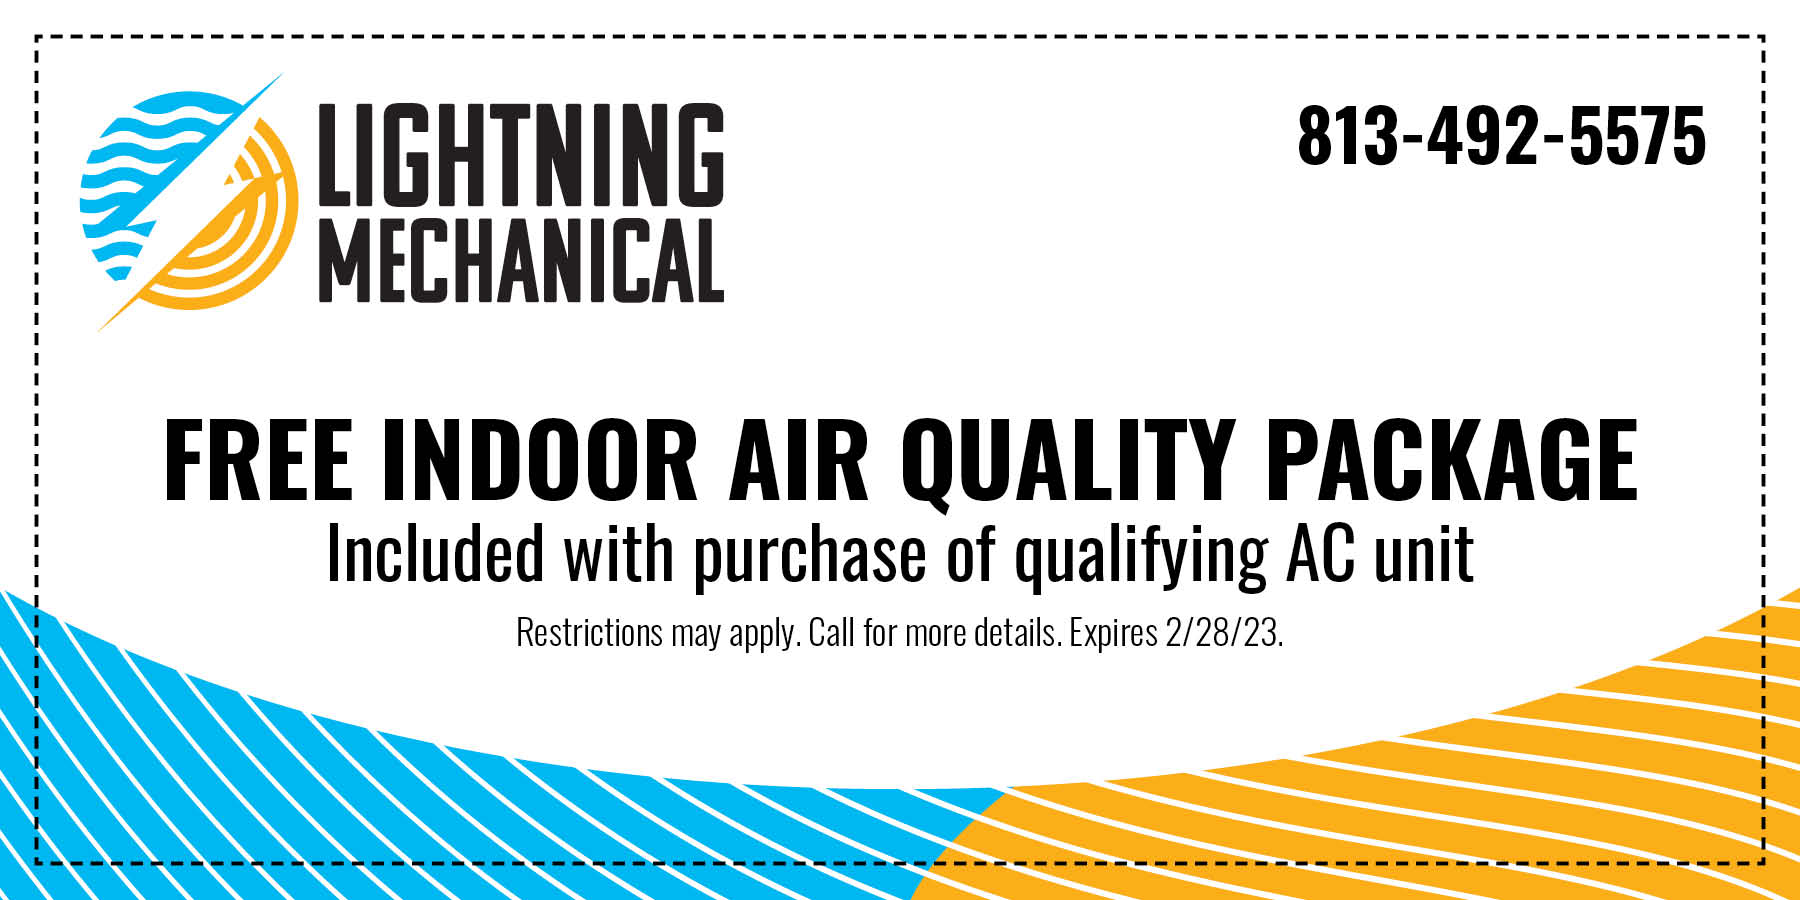 Free indoor air quality package included with purchase of qualifying AC unit expires 2/28/2023.